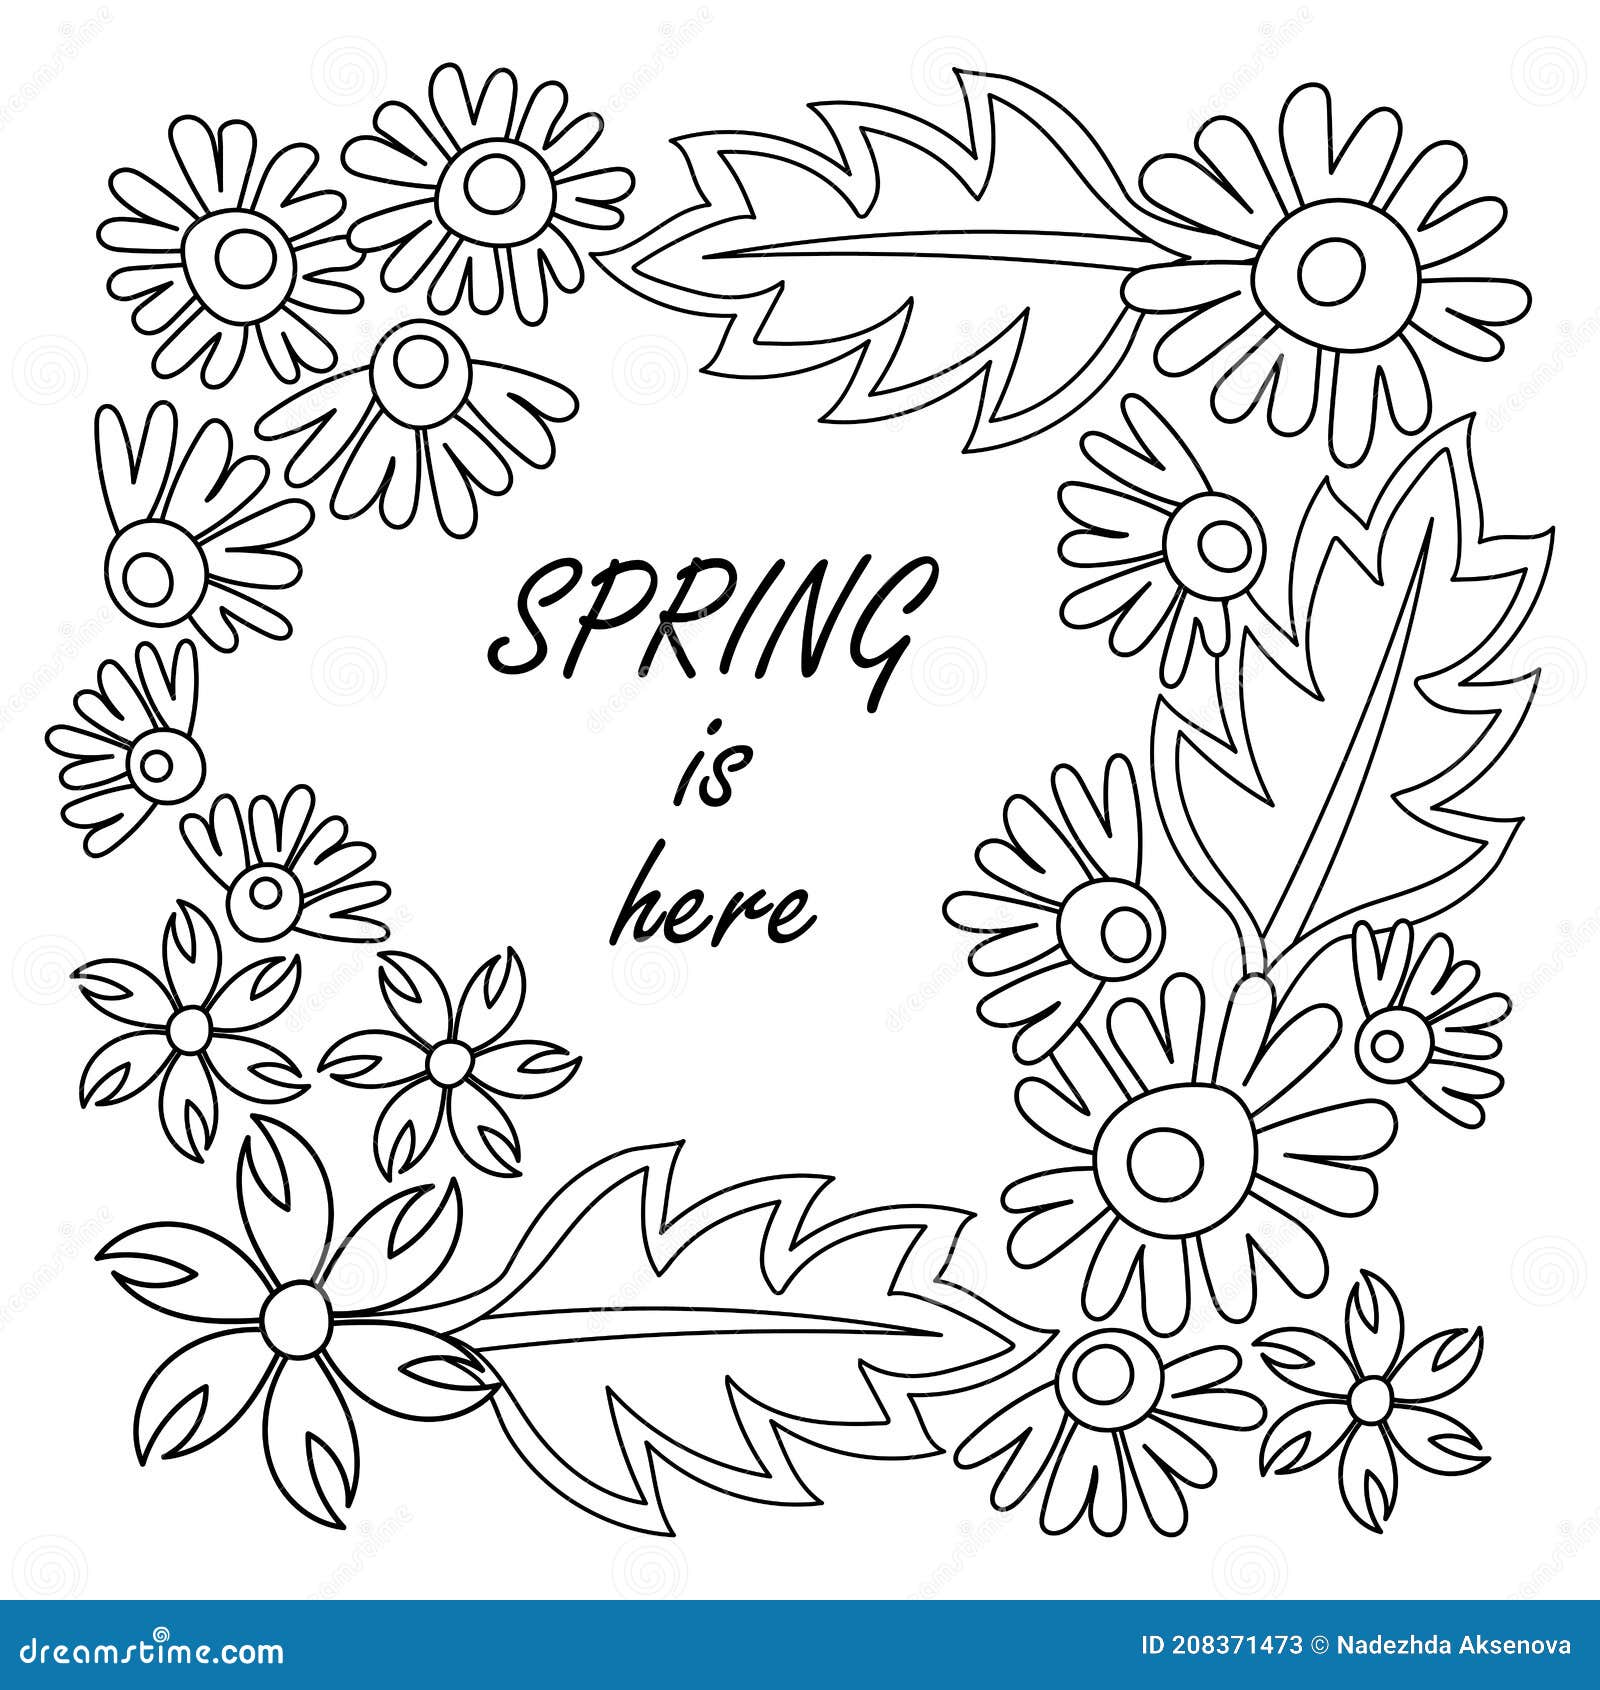 Download Spring Coloring Pages Stock Illustrations 2 564 Spring Coloring Pages Stock Illustrations Vectors Clipart Dreamstime